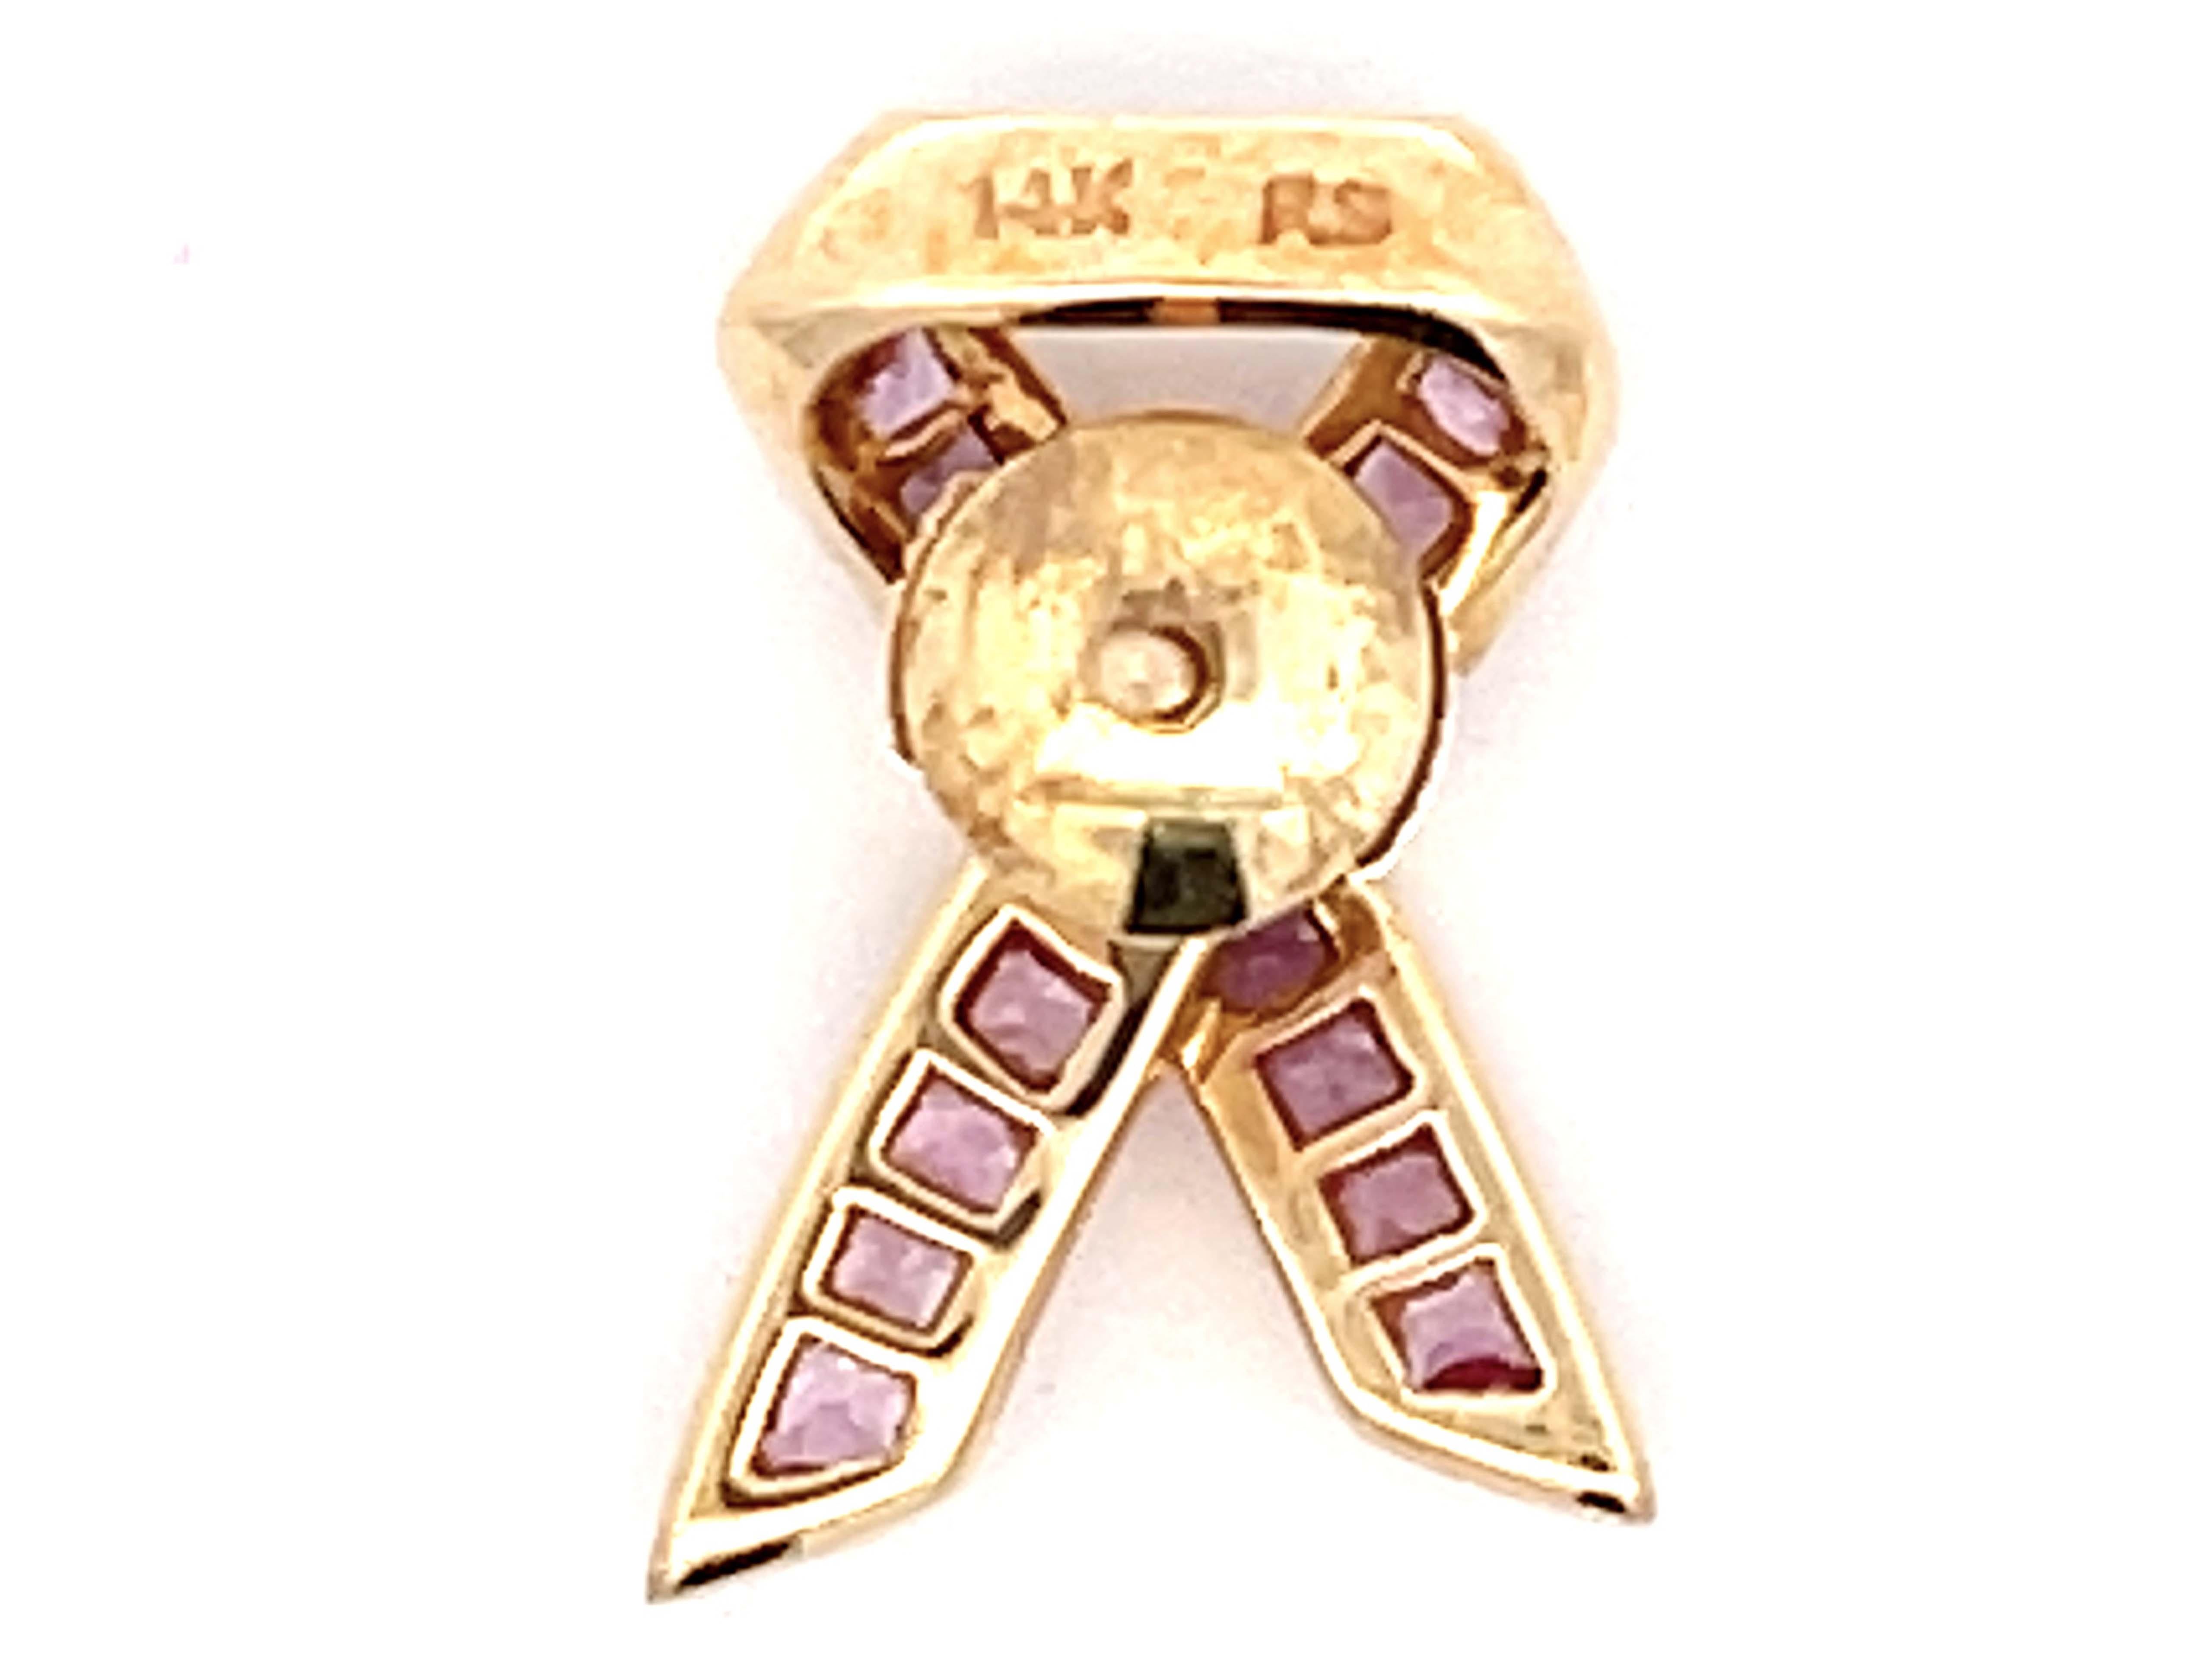 BCRF Pink Ribbon Brooch in 14k Yellow Gold In Excellent Condition For Sale In Honolulu, HI